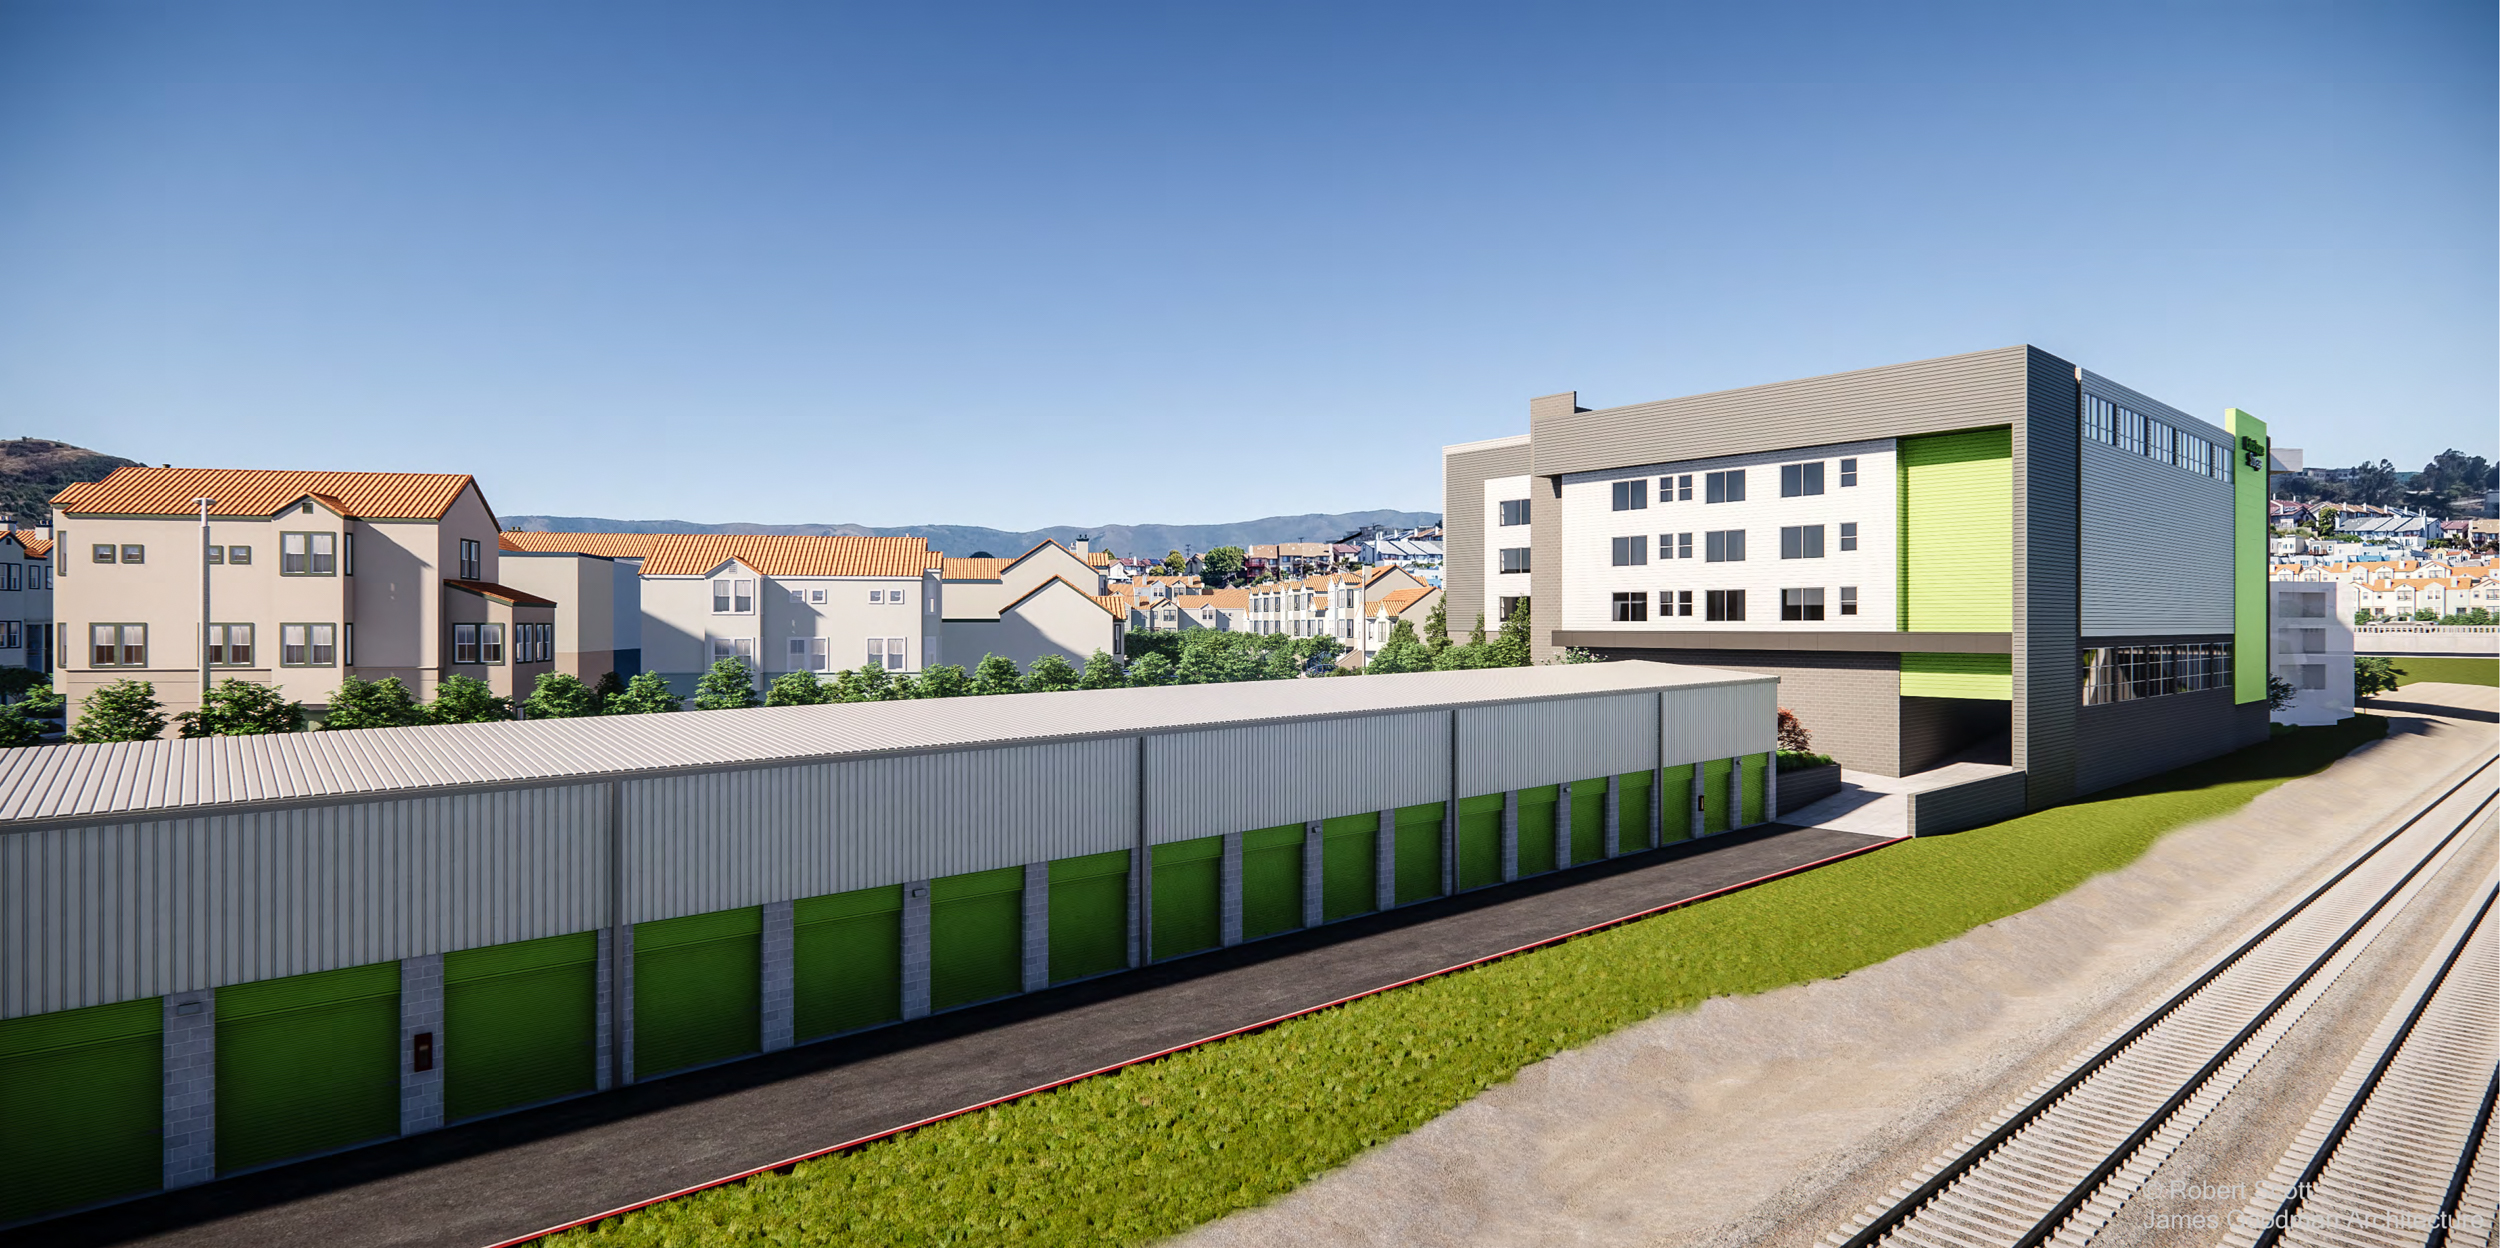 1700 Egbert Avenue self storage building seen from the adjacent train tracks, rendering by James Goodman Architecture and Robert Scott